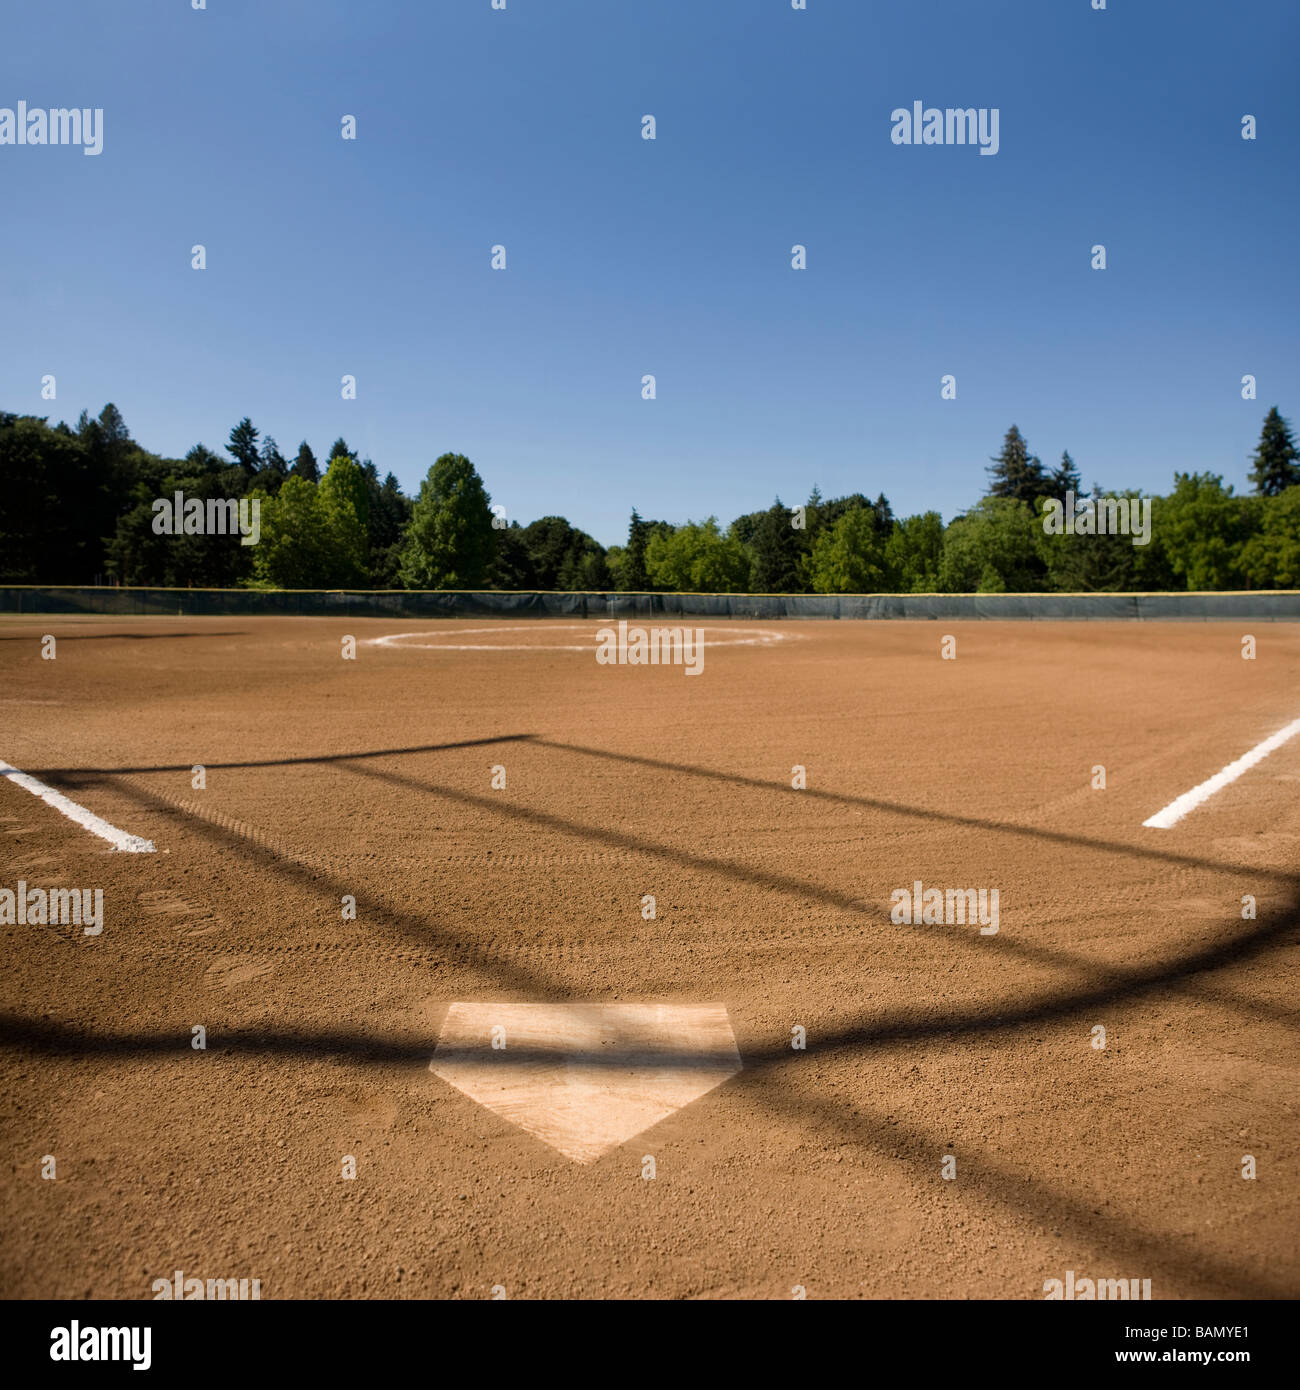 The playing field - baseball concepts Stock Photo